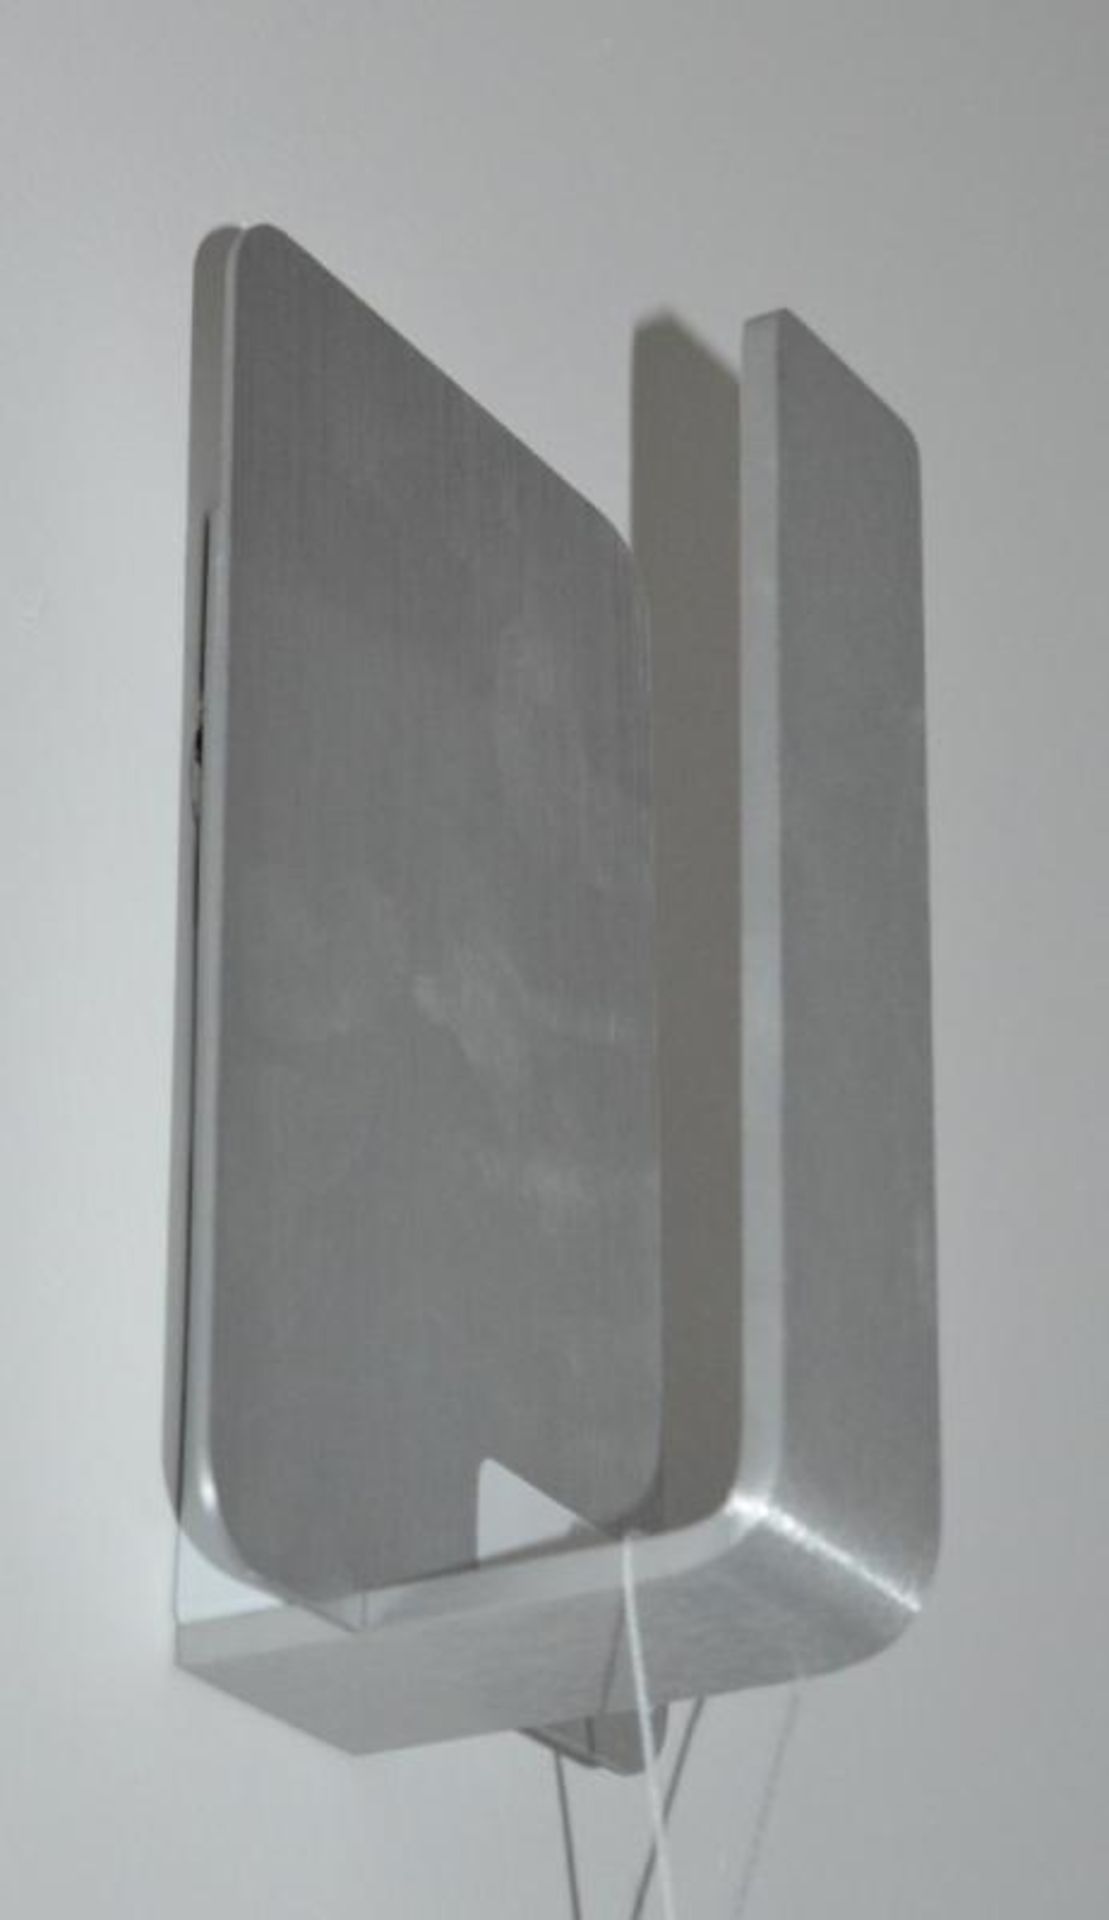 1 x Brushed Aluminium LED 5w Wall Light - Contemporary Design - Ex Display Stock - CL298 - Ref 4 - L - Image 3 of 3